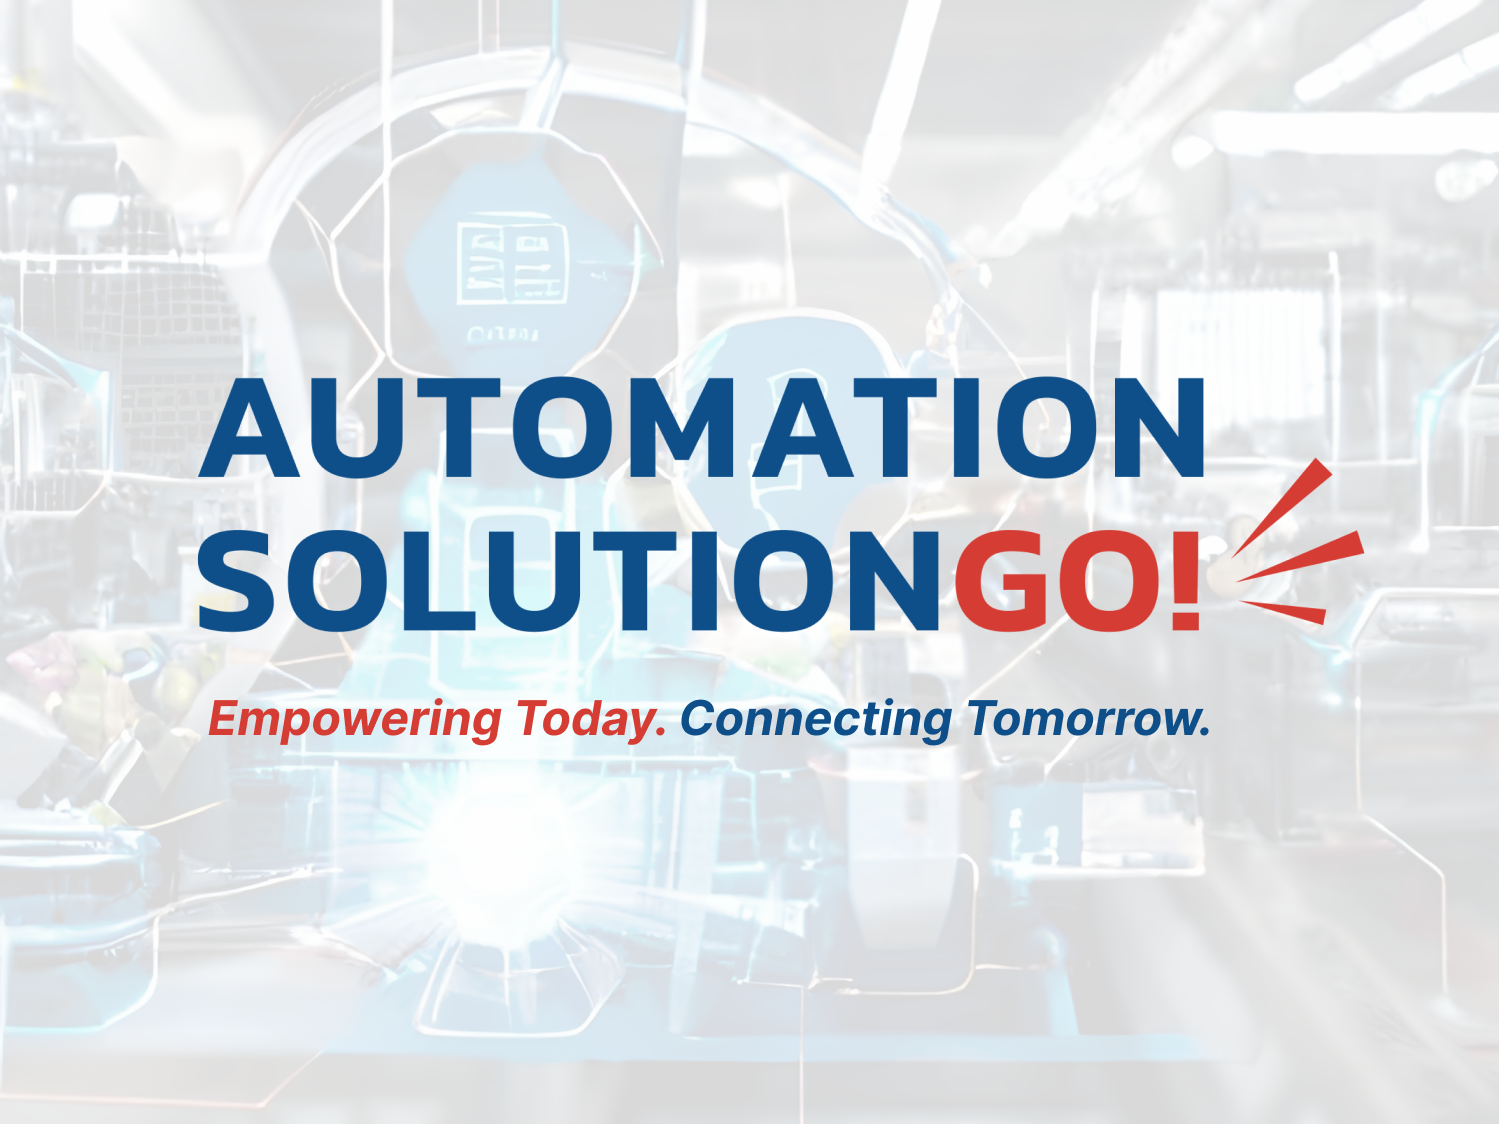 Singapore-Industrial-Automation-Association-SIAA-AutomationSG-solutiongo-2024